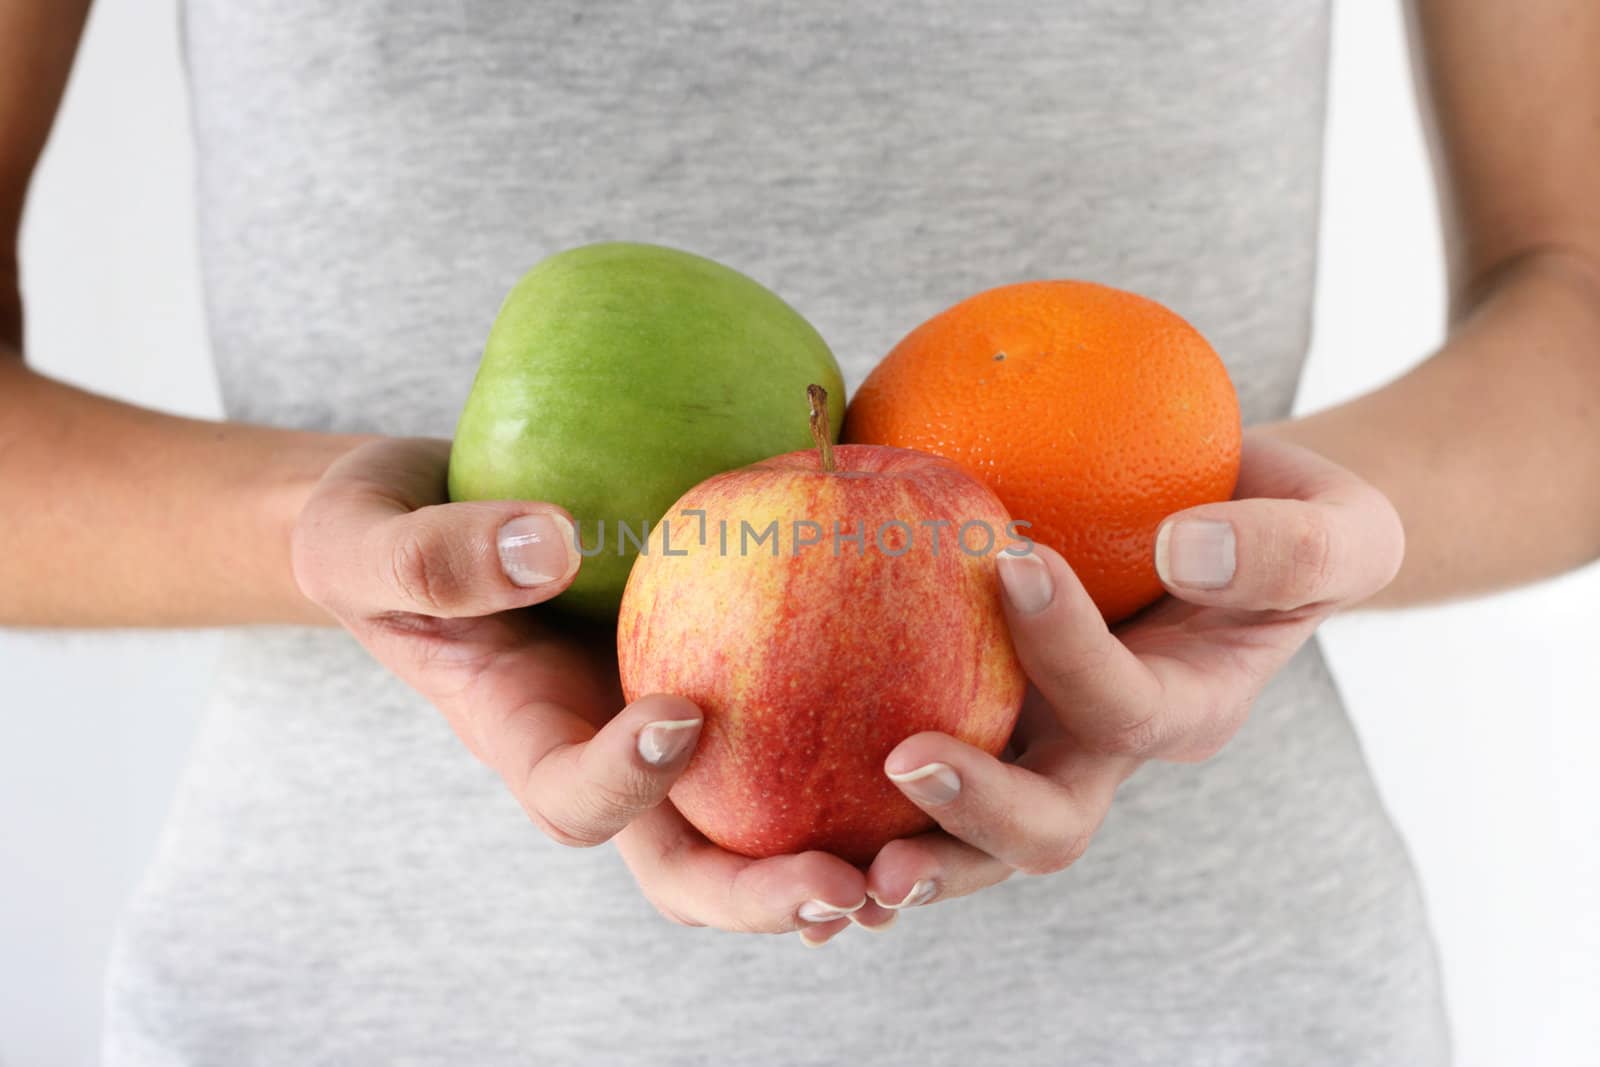 fruits in hands of woman